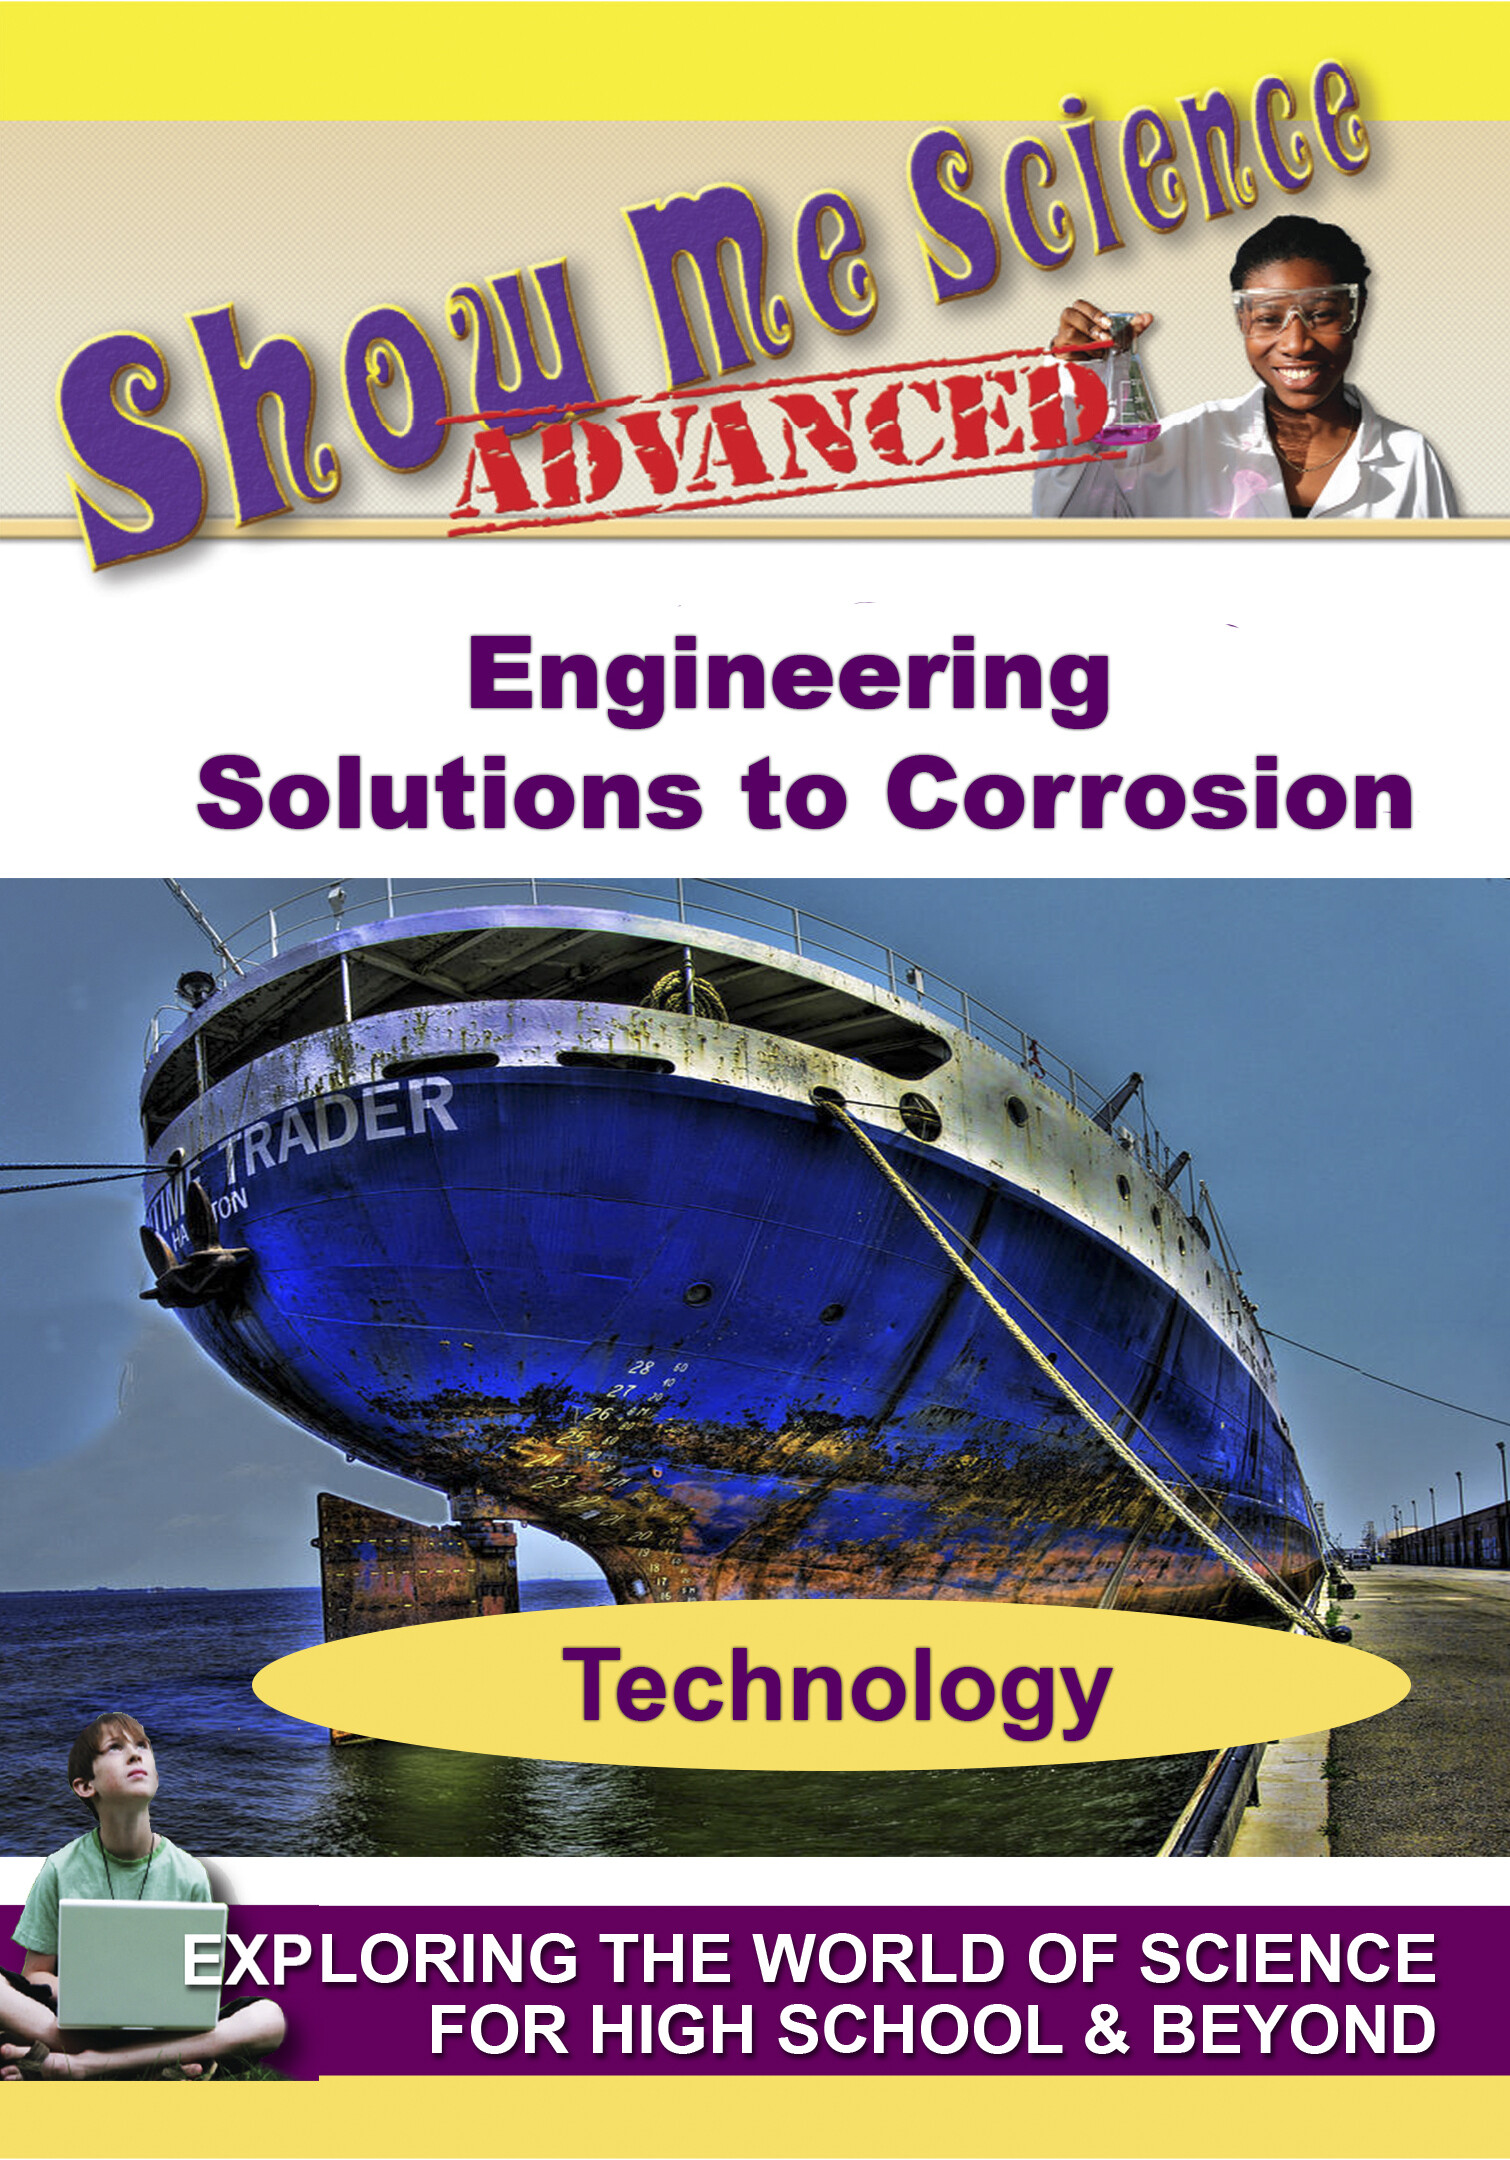 K4684 - Engineering Solutions to Corrosion